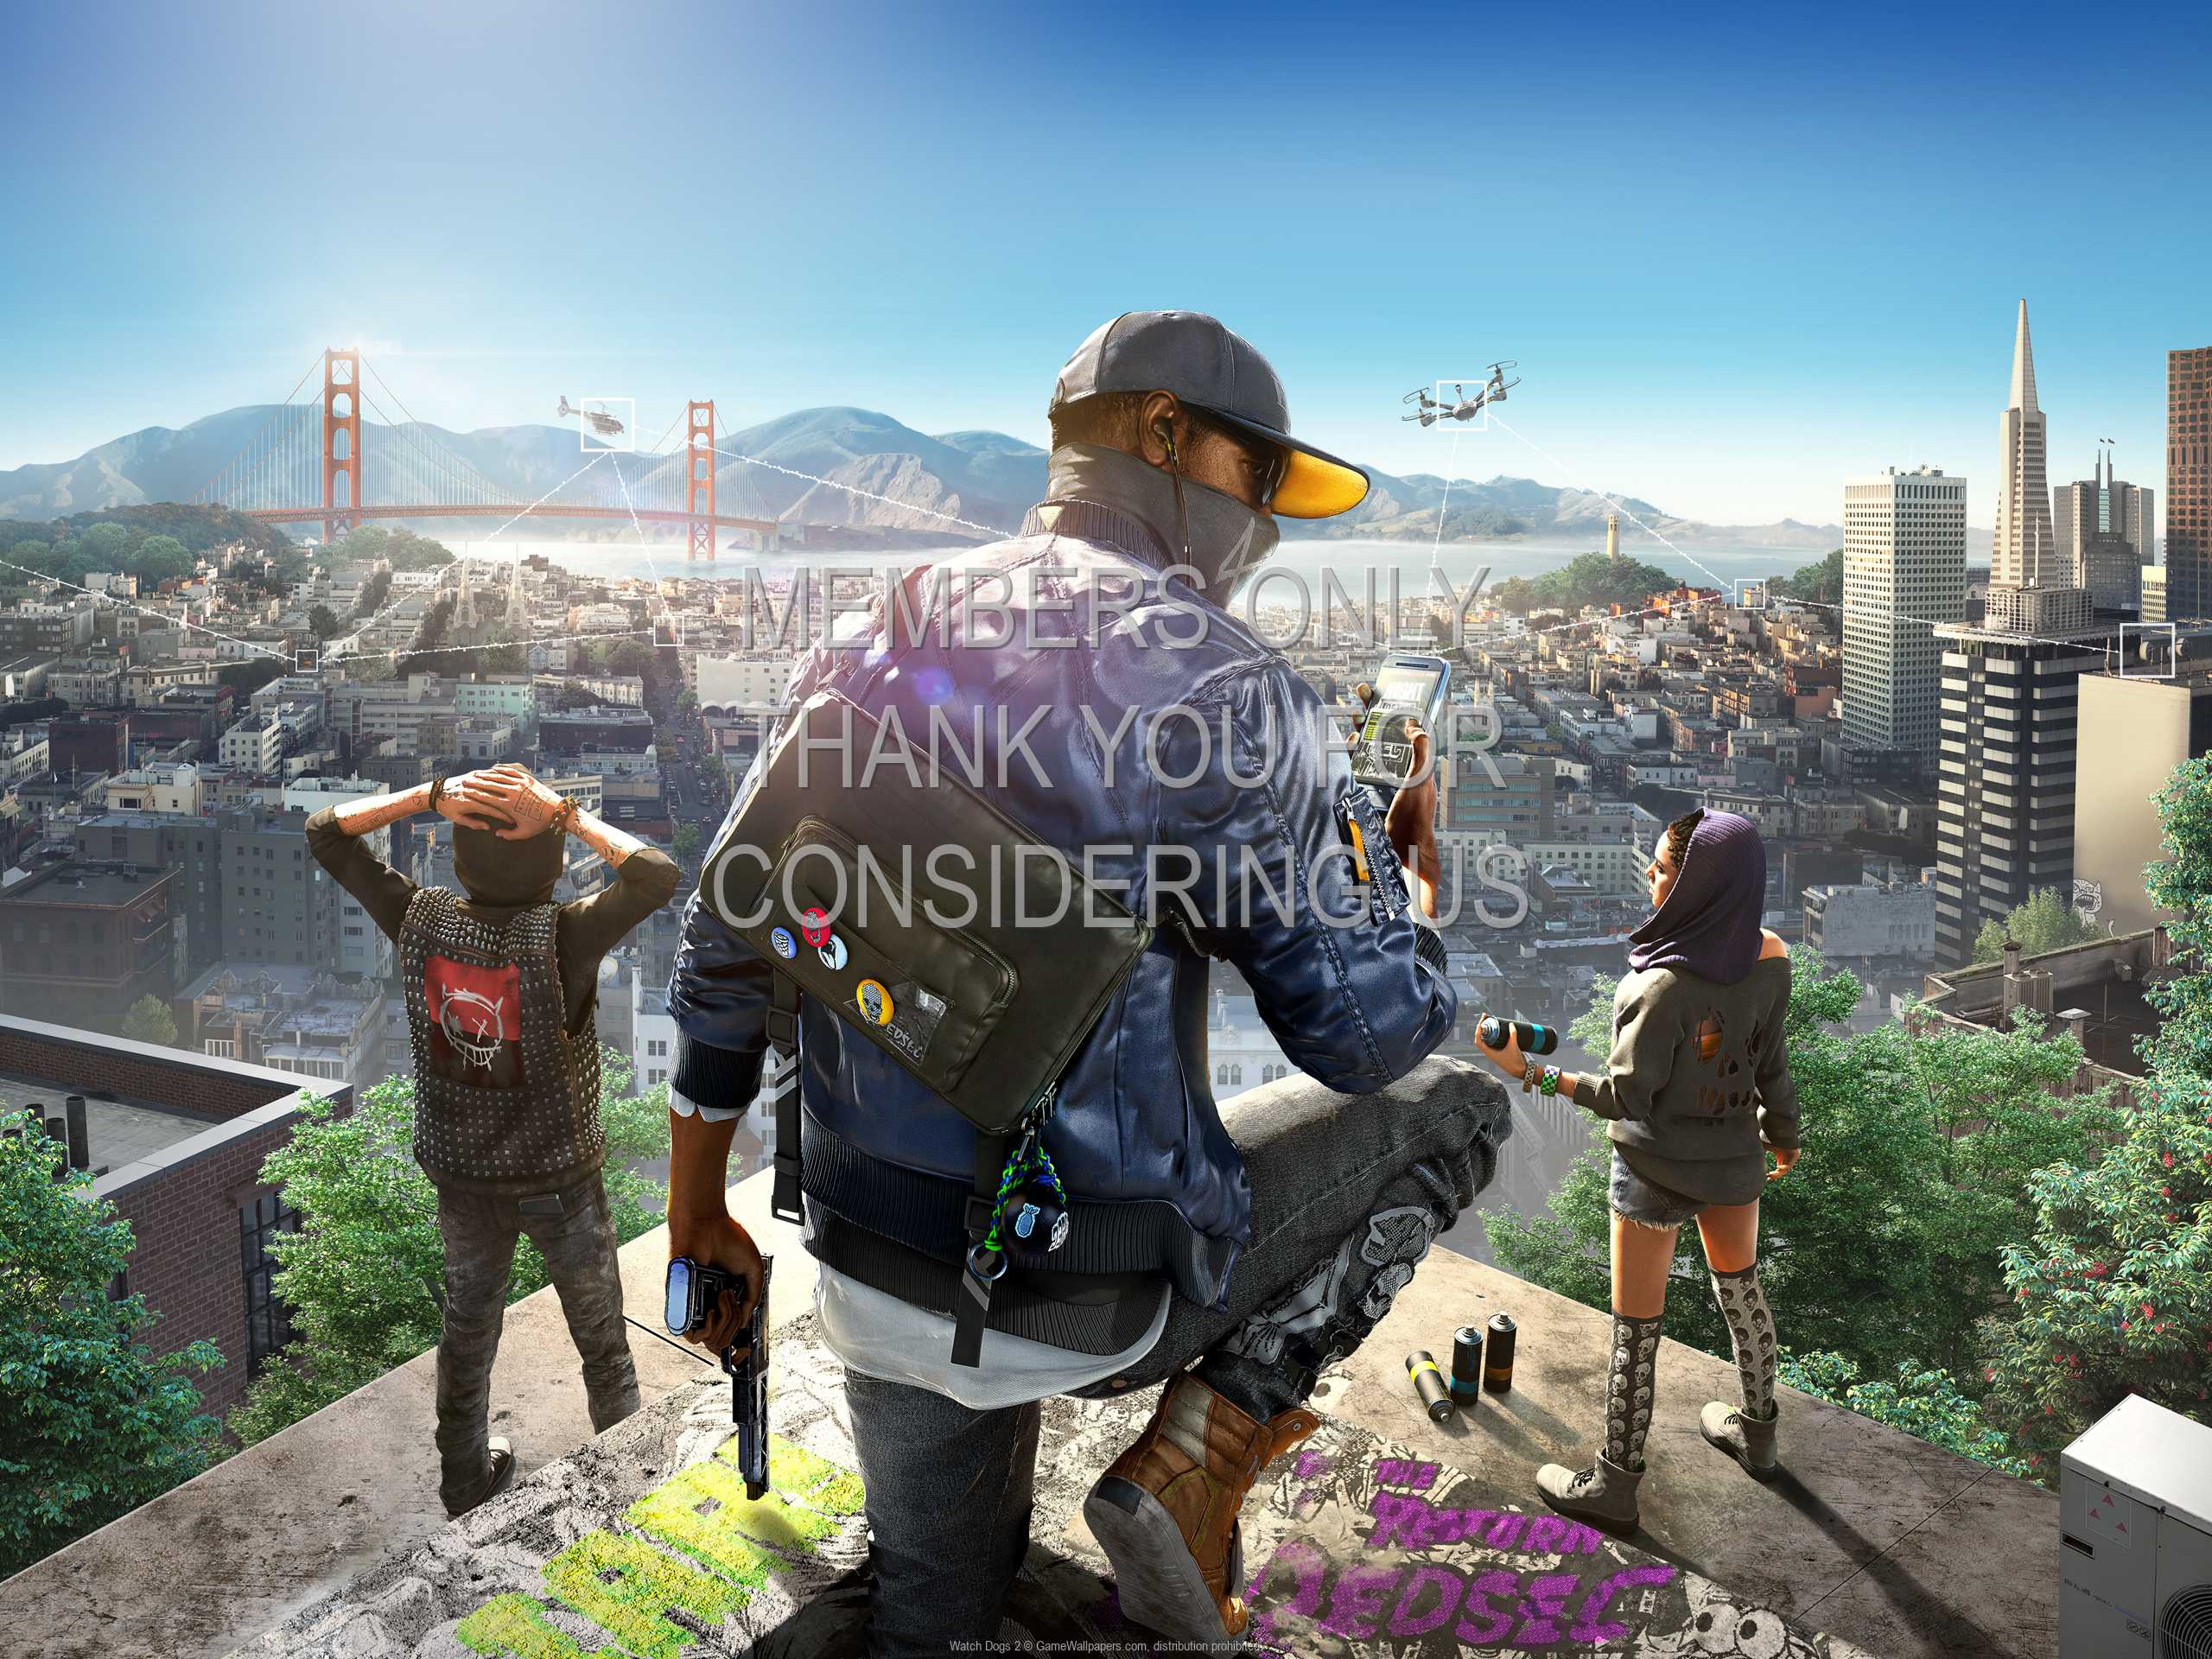 Watch Dogs 2 1080p Horizontal Mobile wallpaper or background 01